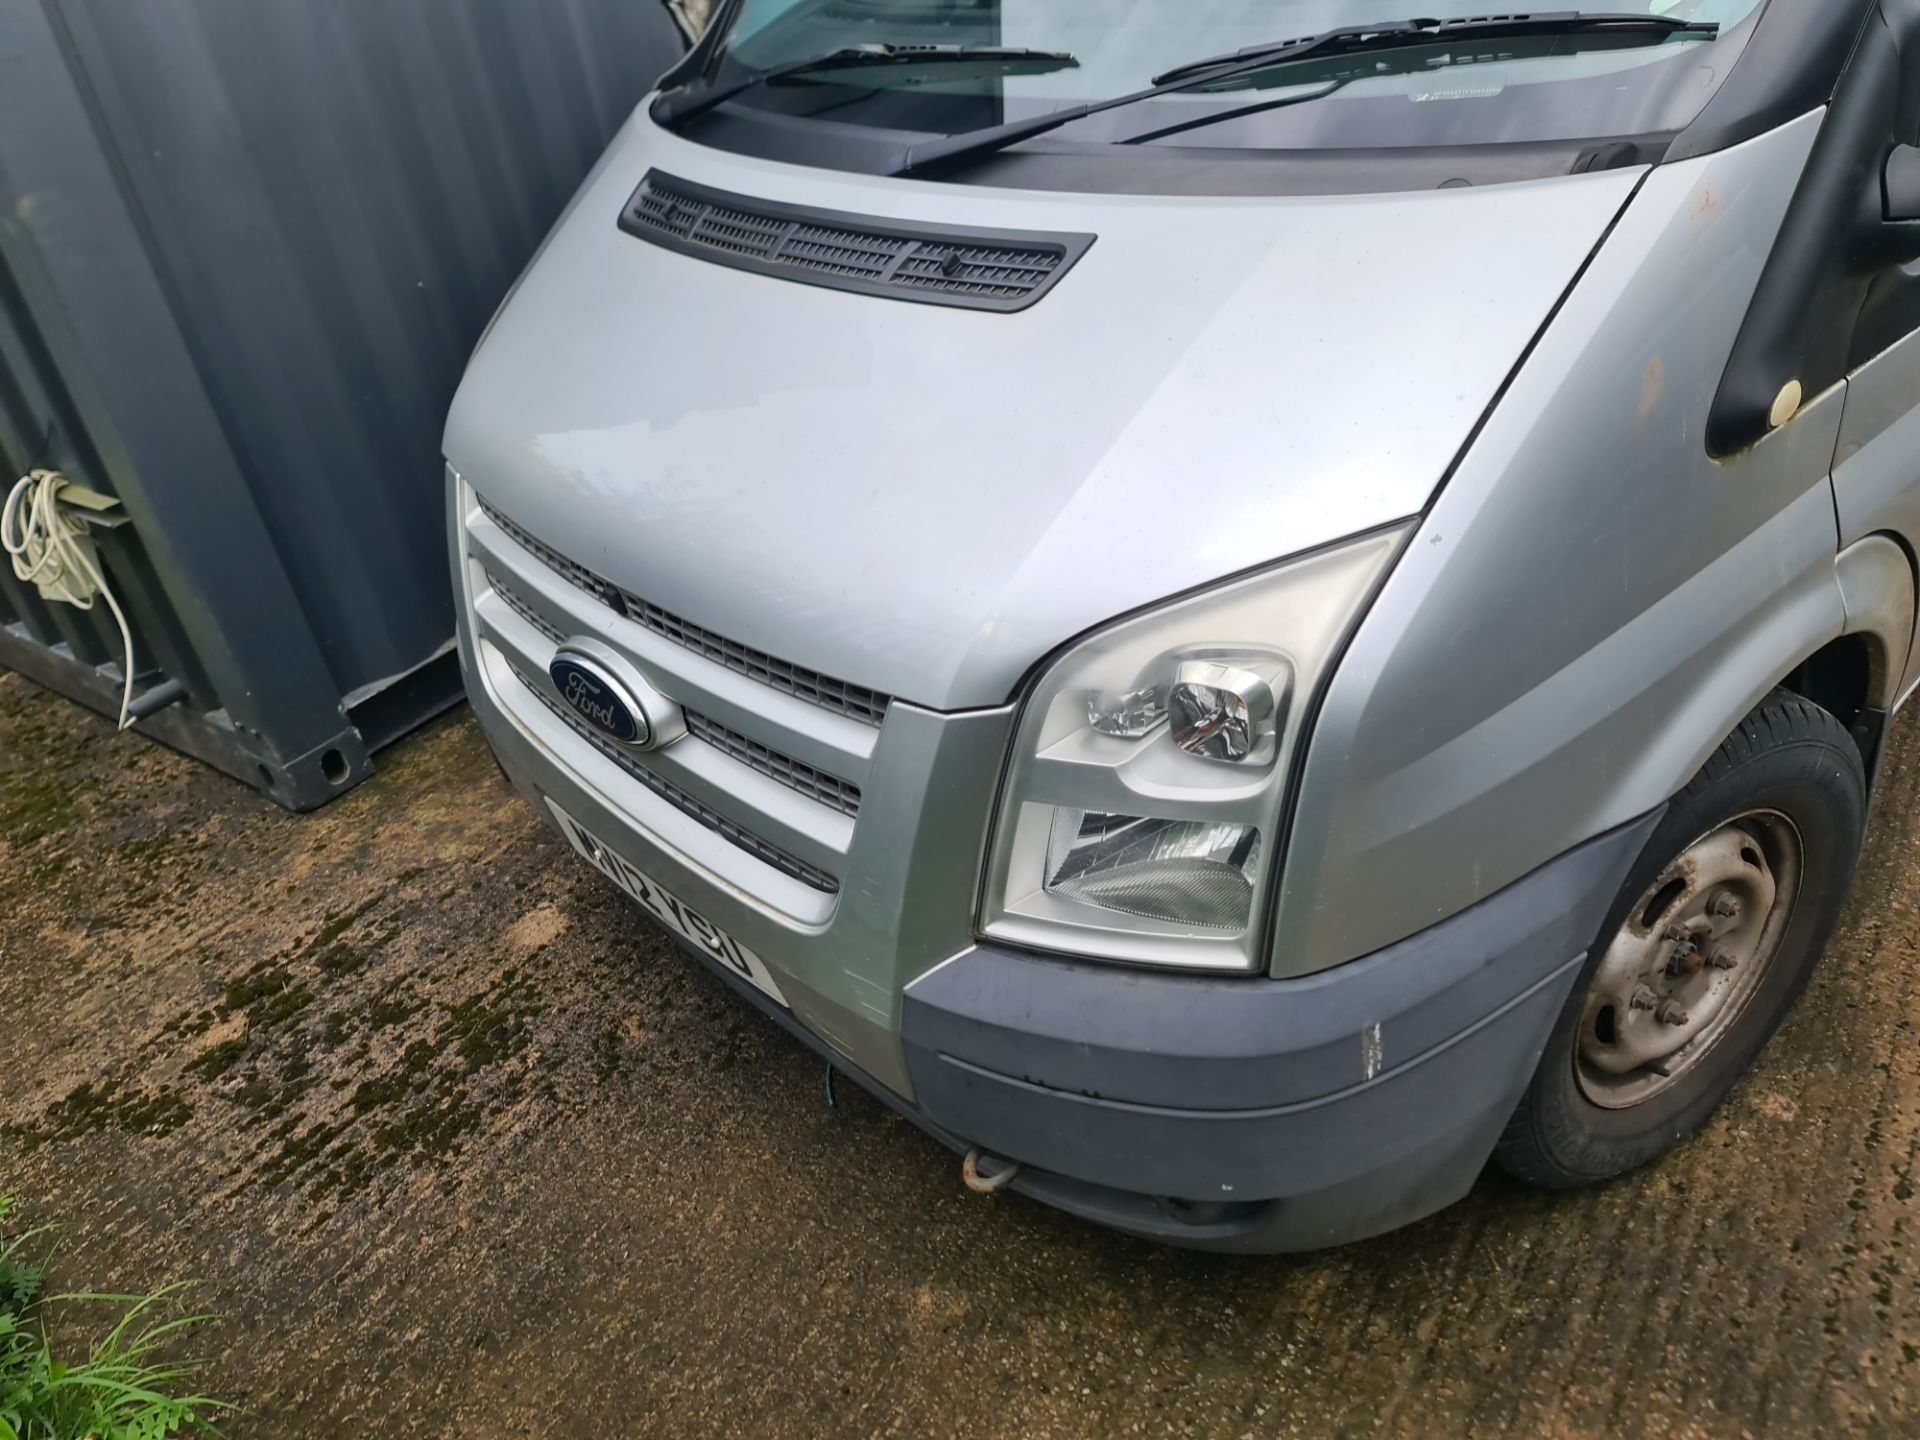 2012 Ford Transit 125 T280 Trend FWD panel van - Image 9 of 19